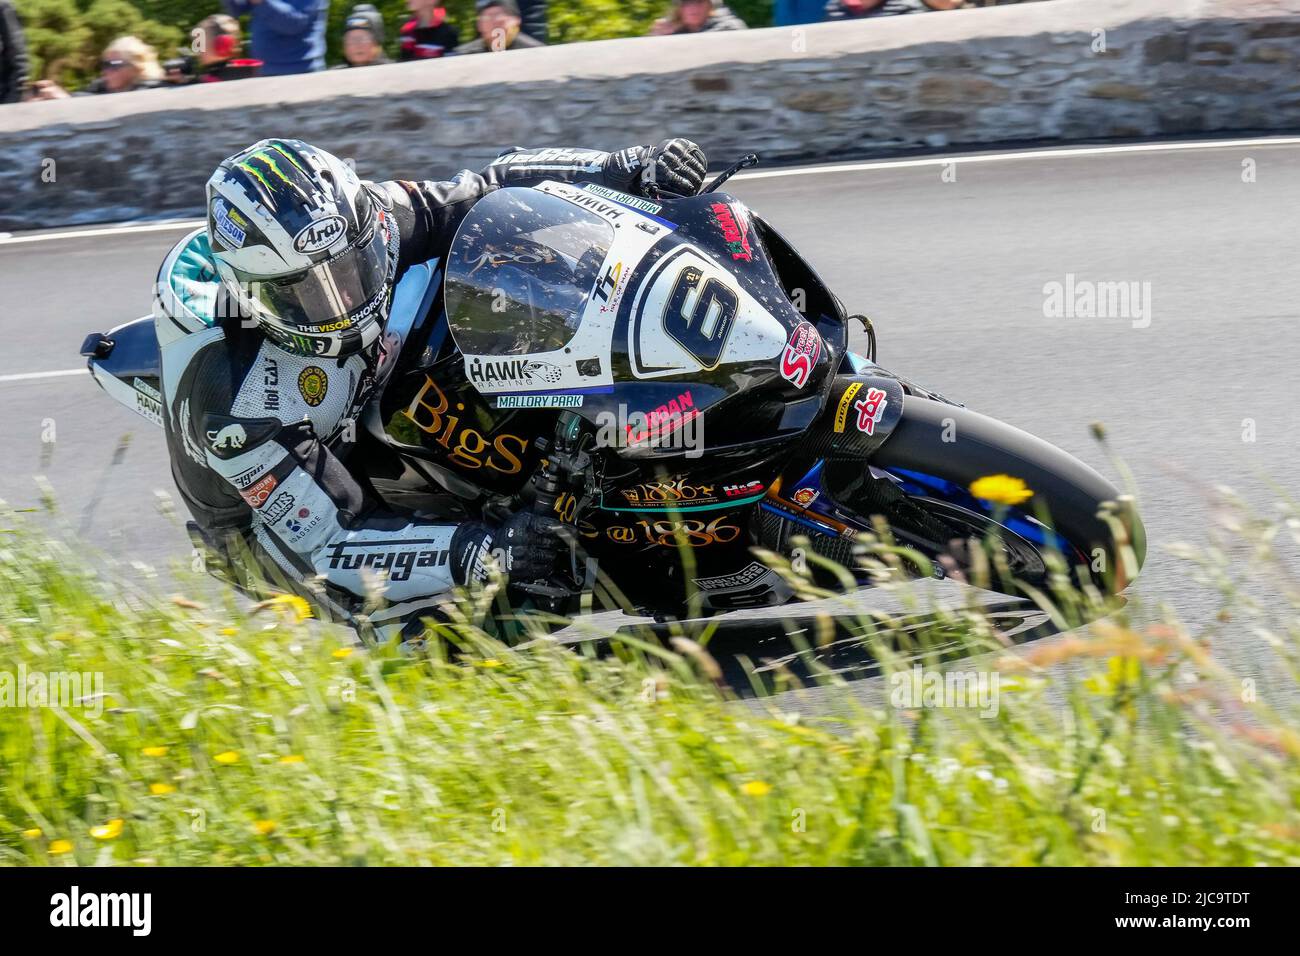 Douglas, Isle Of Man. 11th June, 2022. Michael Dunlop (1000 Ducati) representing the PBM Ducati team during the 2022 Milwaukee Senior TT at the Isle of Man, Douglas, Isle of Man on the 11 June 2022. Photo by David Horn. Credit: PRiME Media Images/Alamy Live News Stock Photo